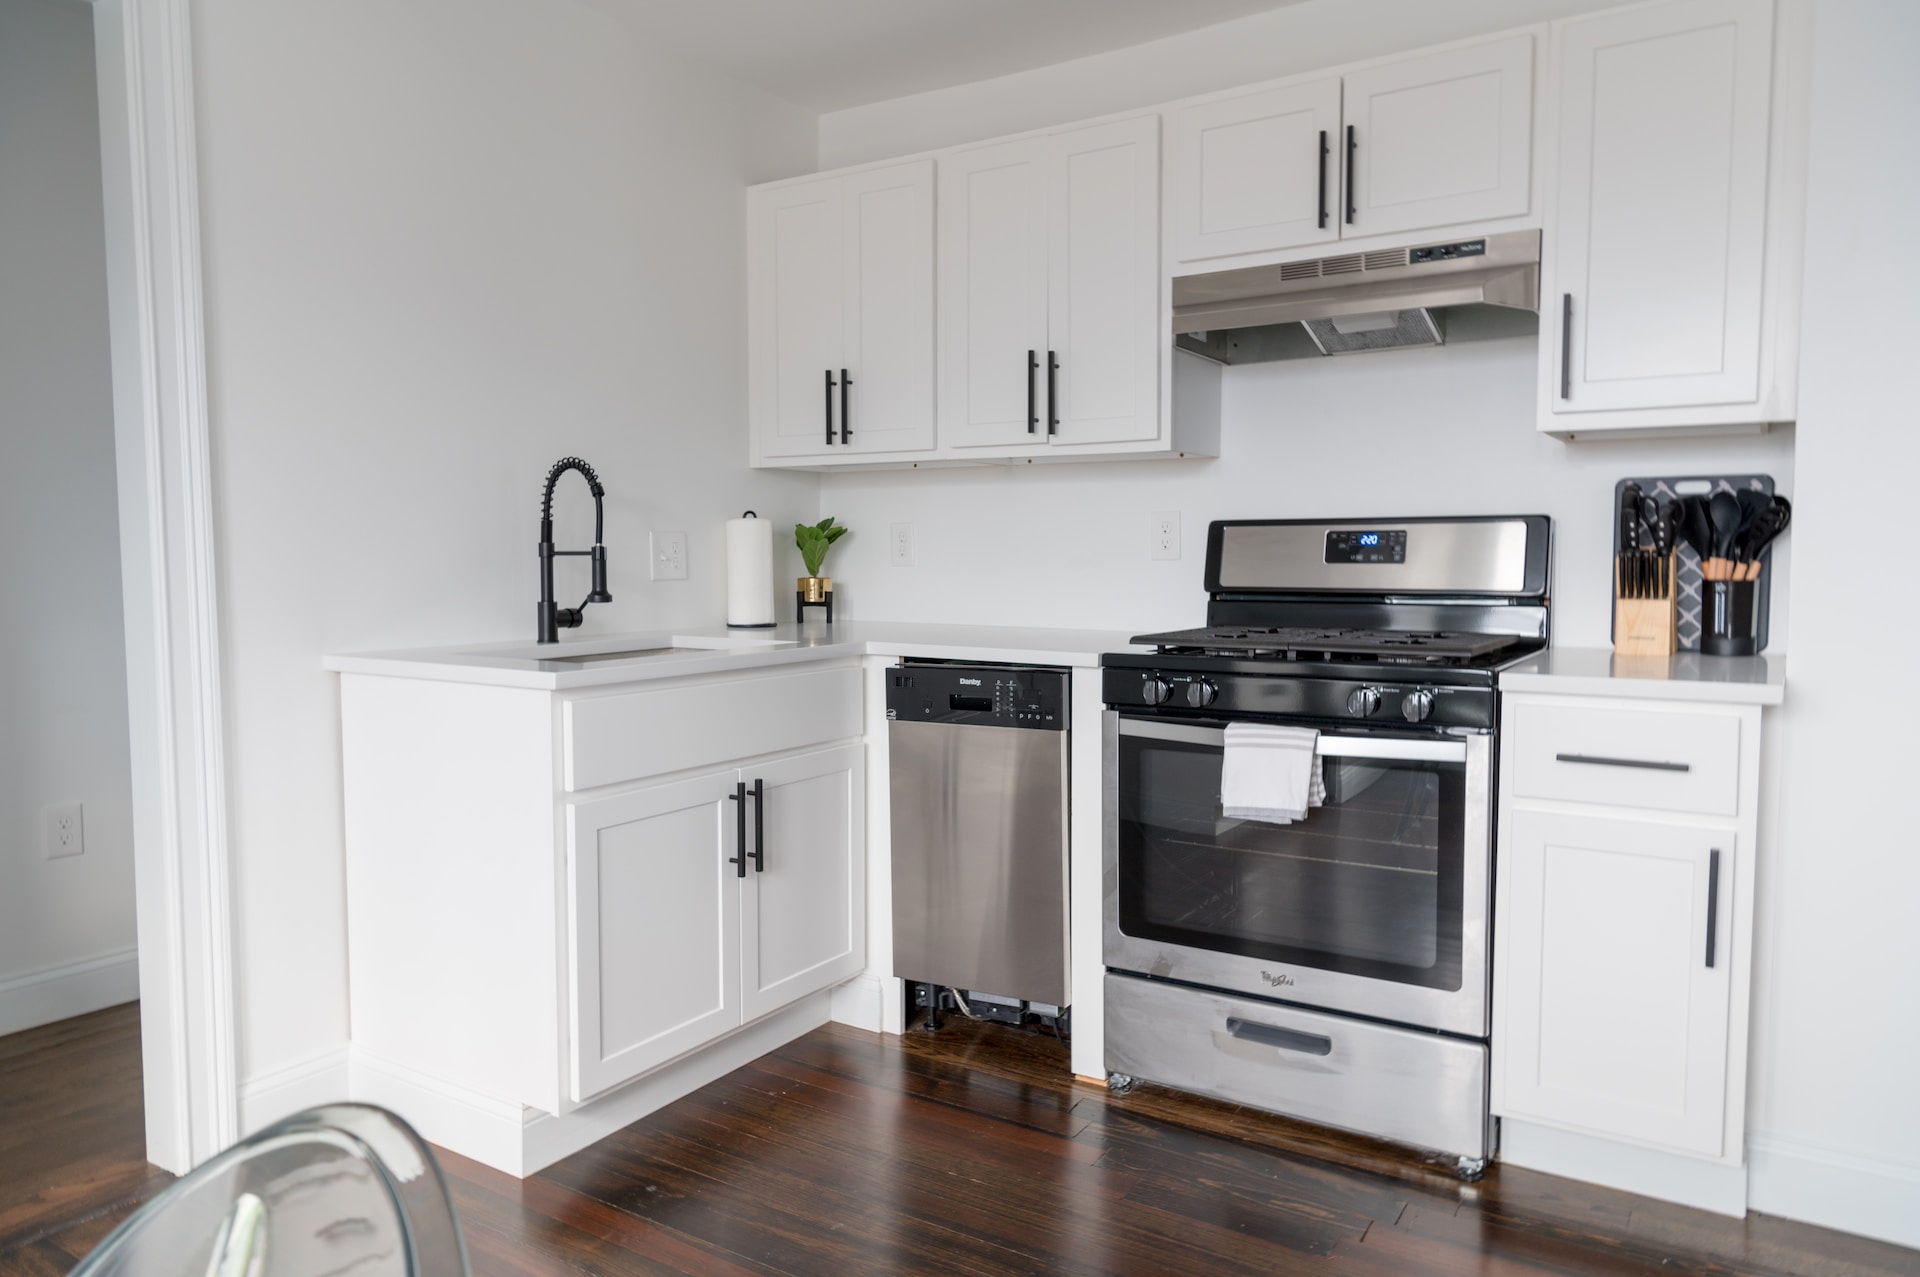 Home appliance repair in New York